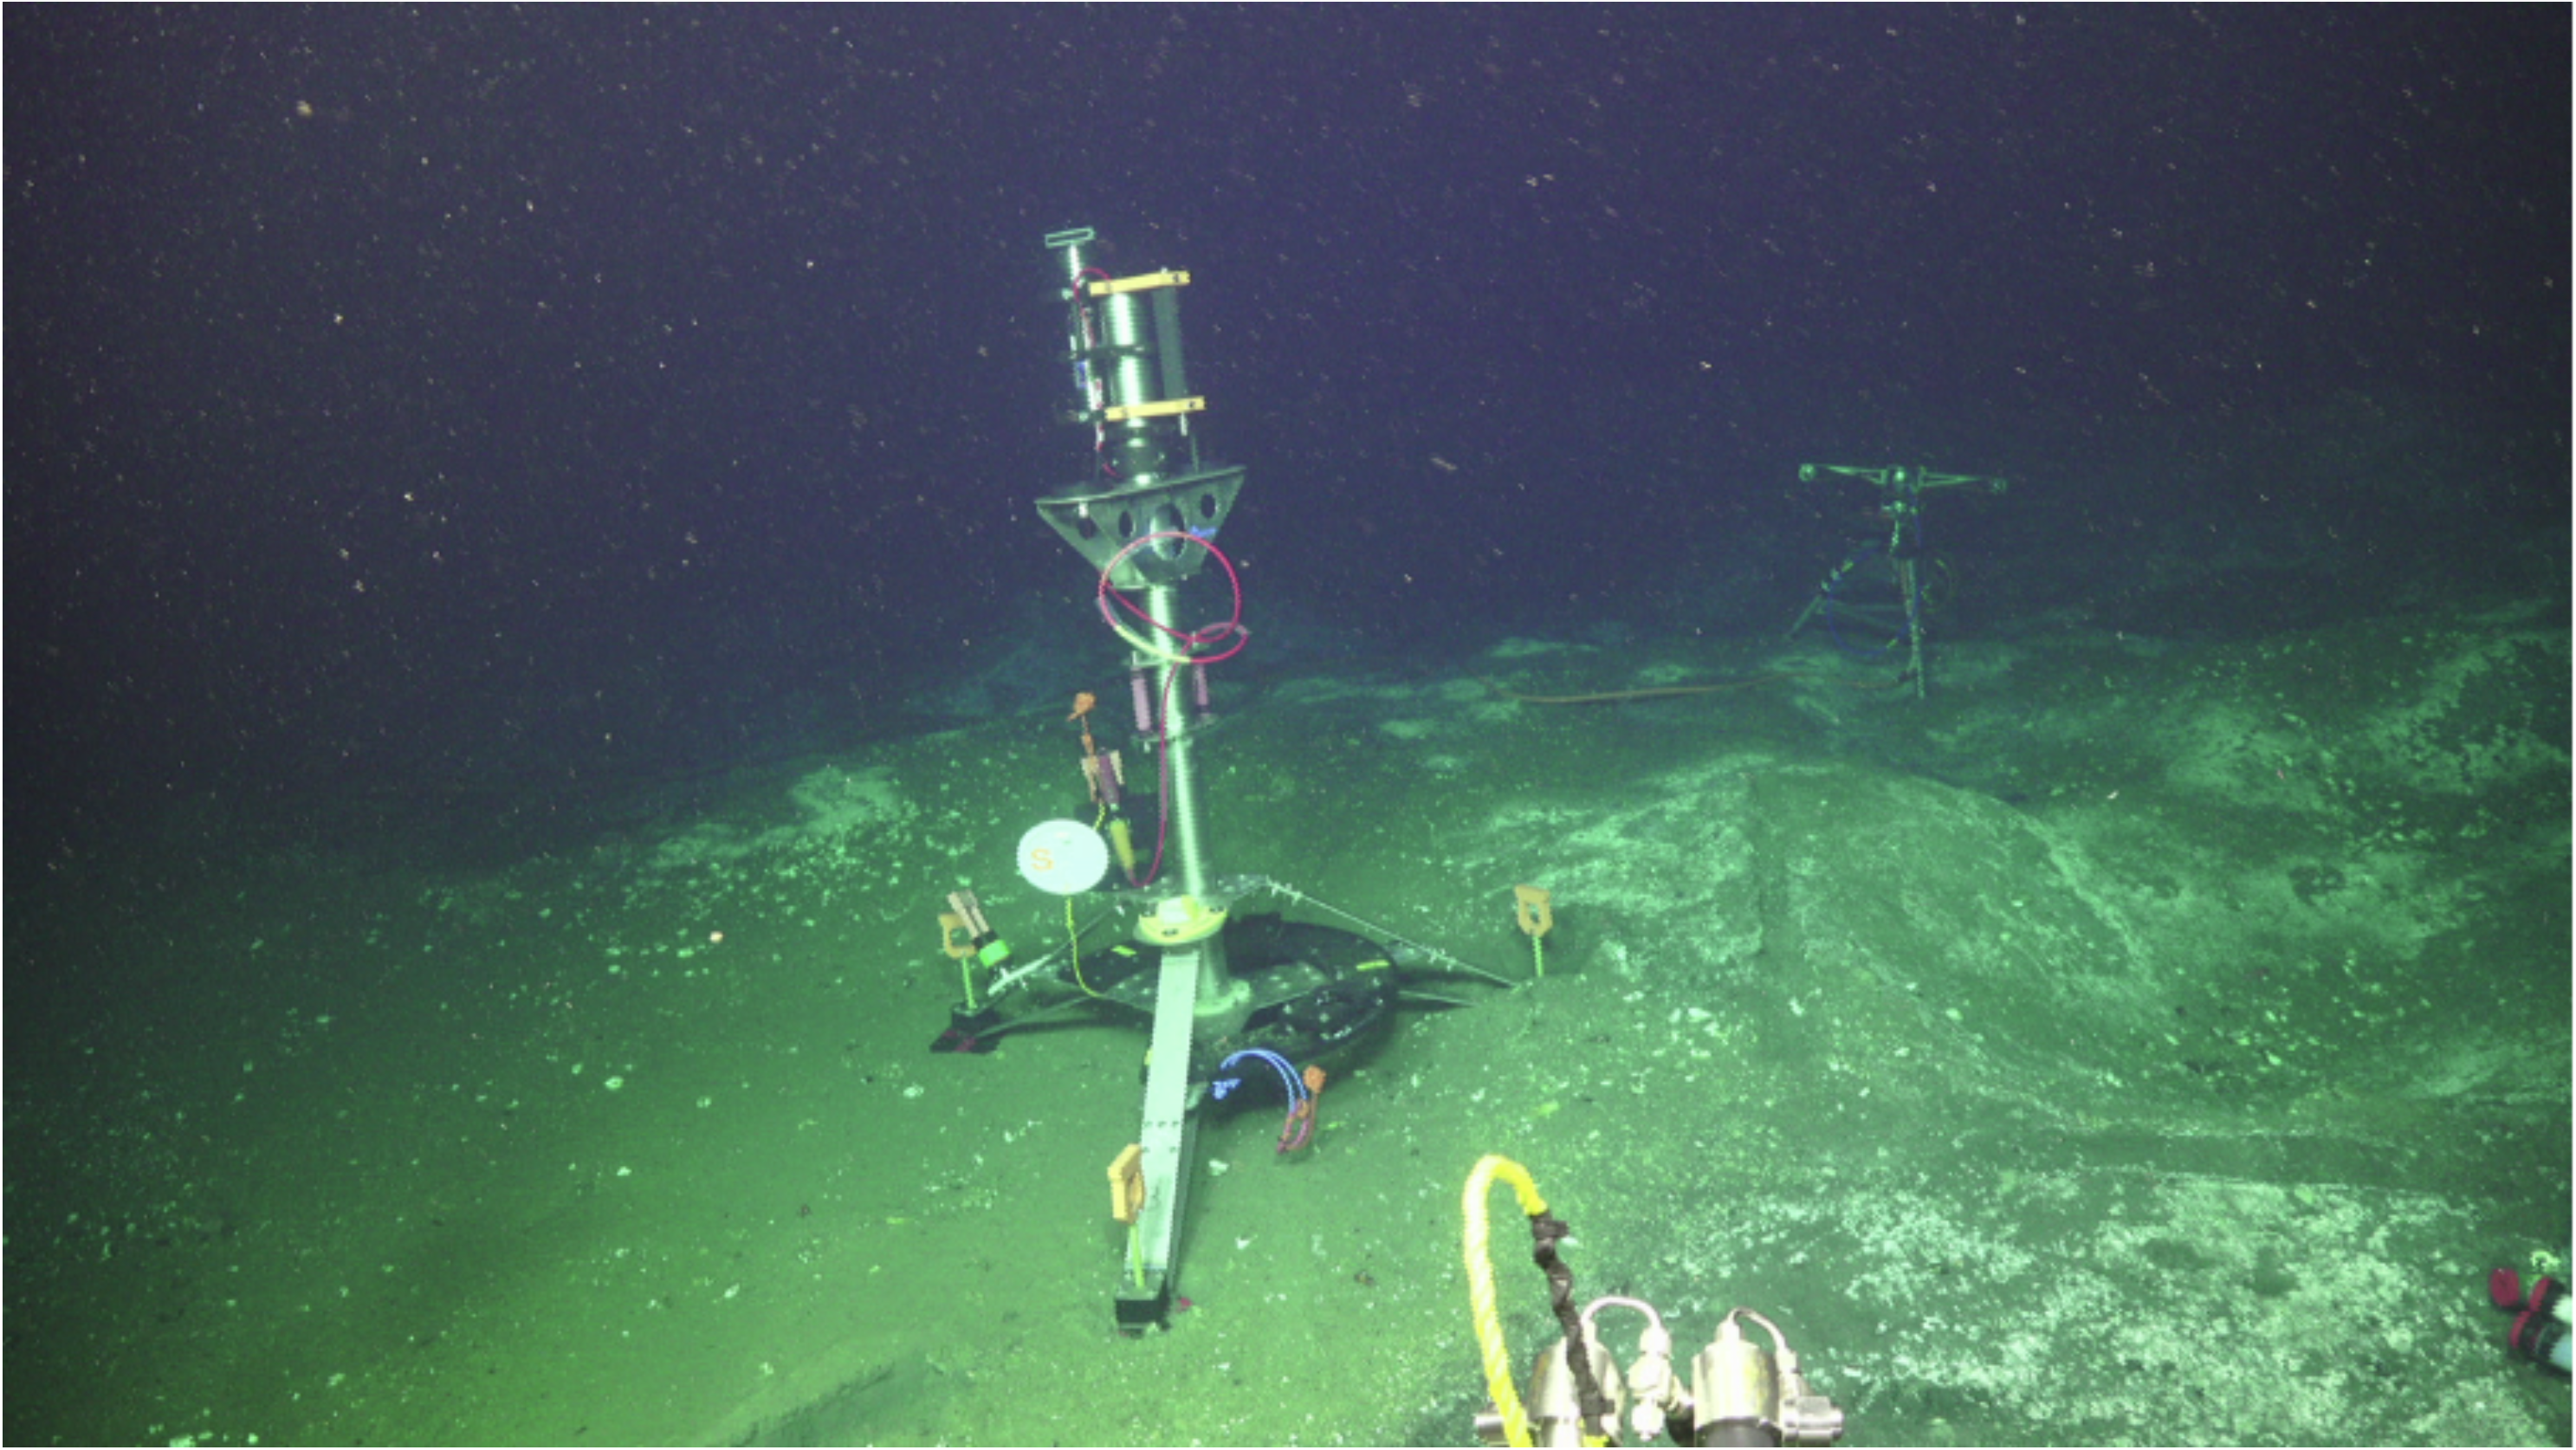 Figure 1. The Quantification Scanning Sonar (QSS) is mounted at the top of a 2.8 m-high tripod. It is installed on flat sediments adjacent to hummocky terrain around the Einstein's Grotto vent. The RCA Digital Still Camera (CAMDSB103) is visible in the background. Credit: UW/NSF-OOI/WHOI; V18.